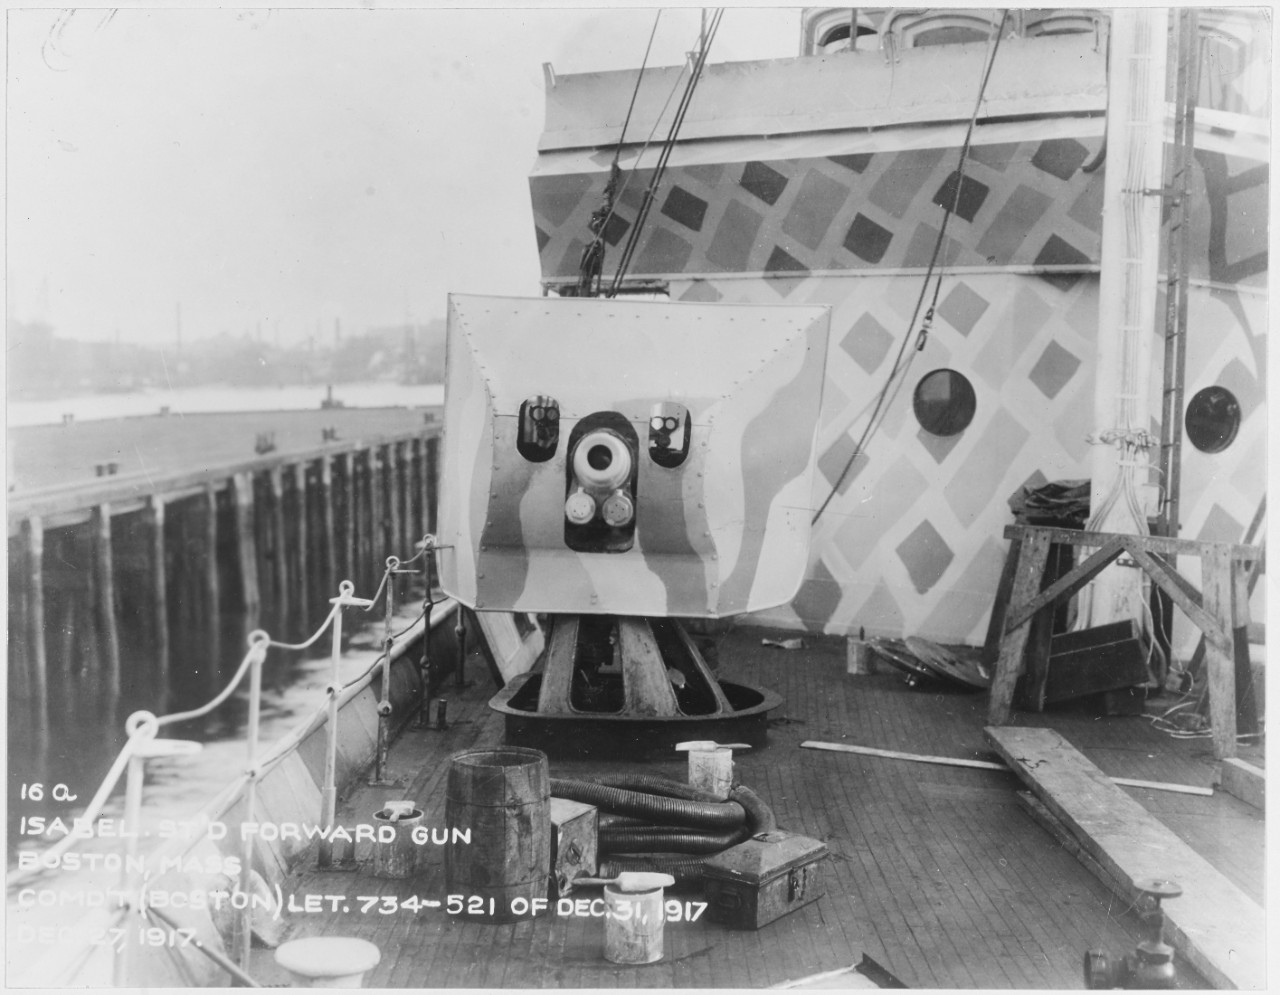 View on the forecastle, showing the ship's starboard forward 3-inch/50 caliber gun. Photographed at the Boston Navy Yard on 27 December 1917. (Naval History and Heritage Command Photograph NH 545)